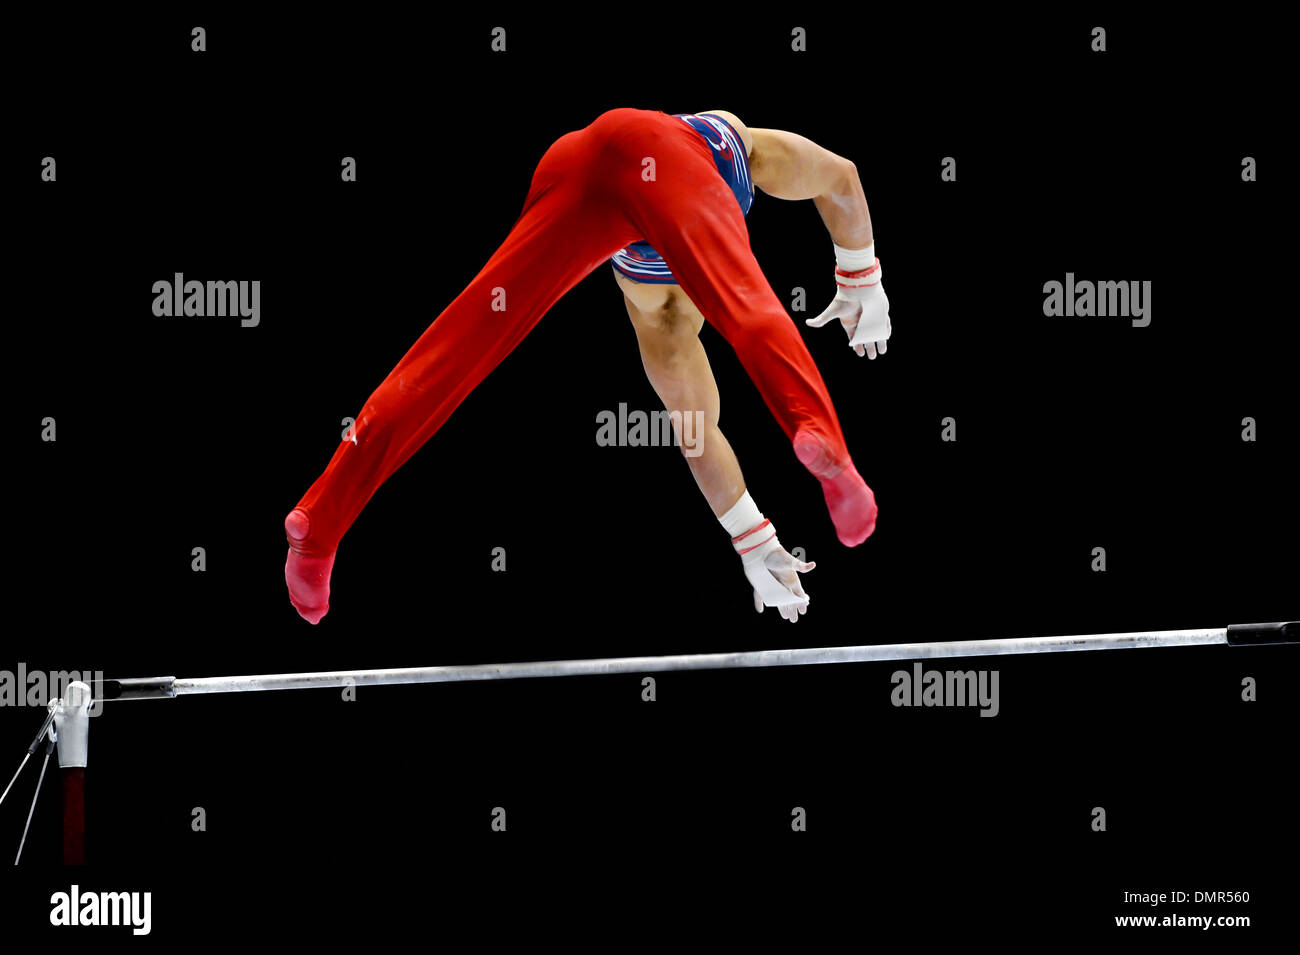 Gymnast performs on the uneven bars apparatus Stock Photo